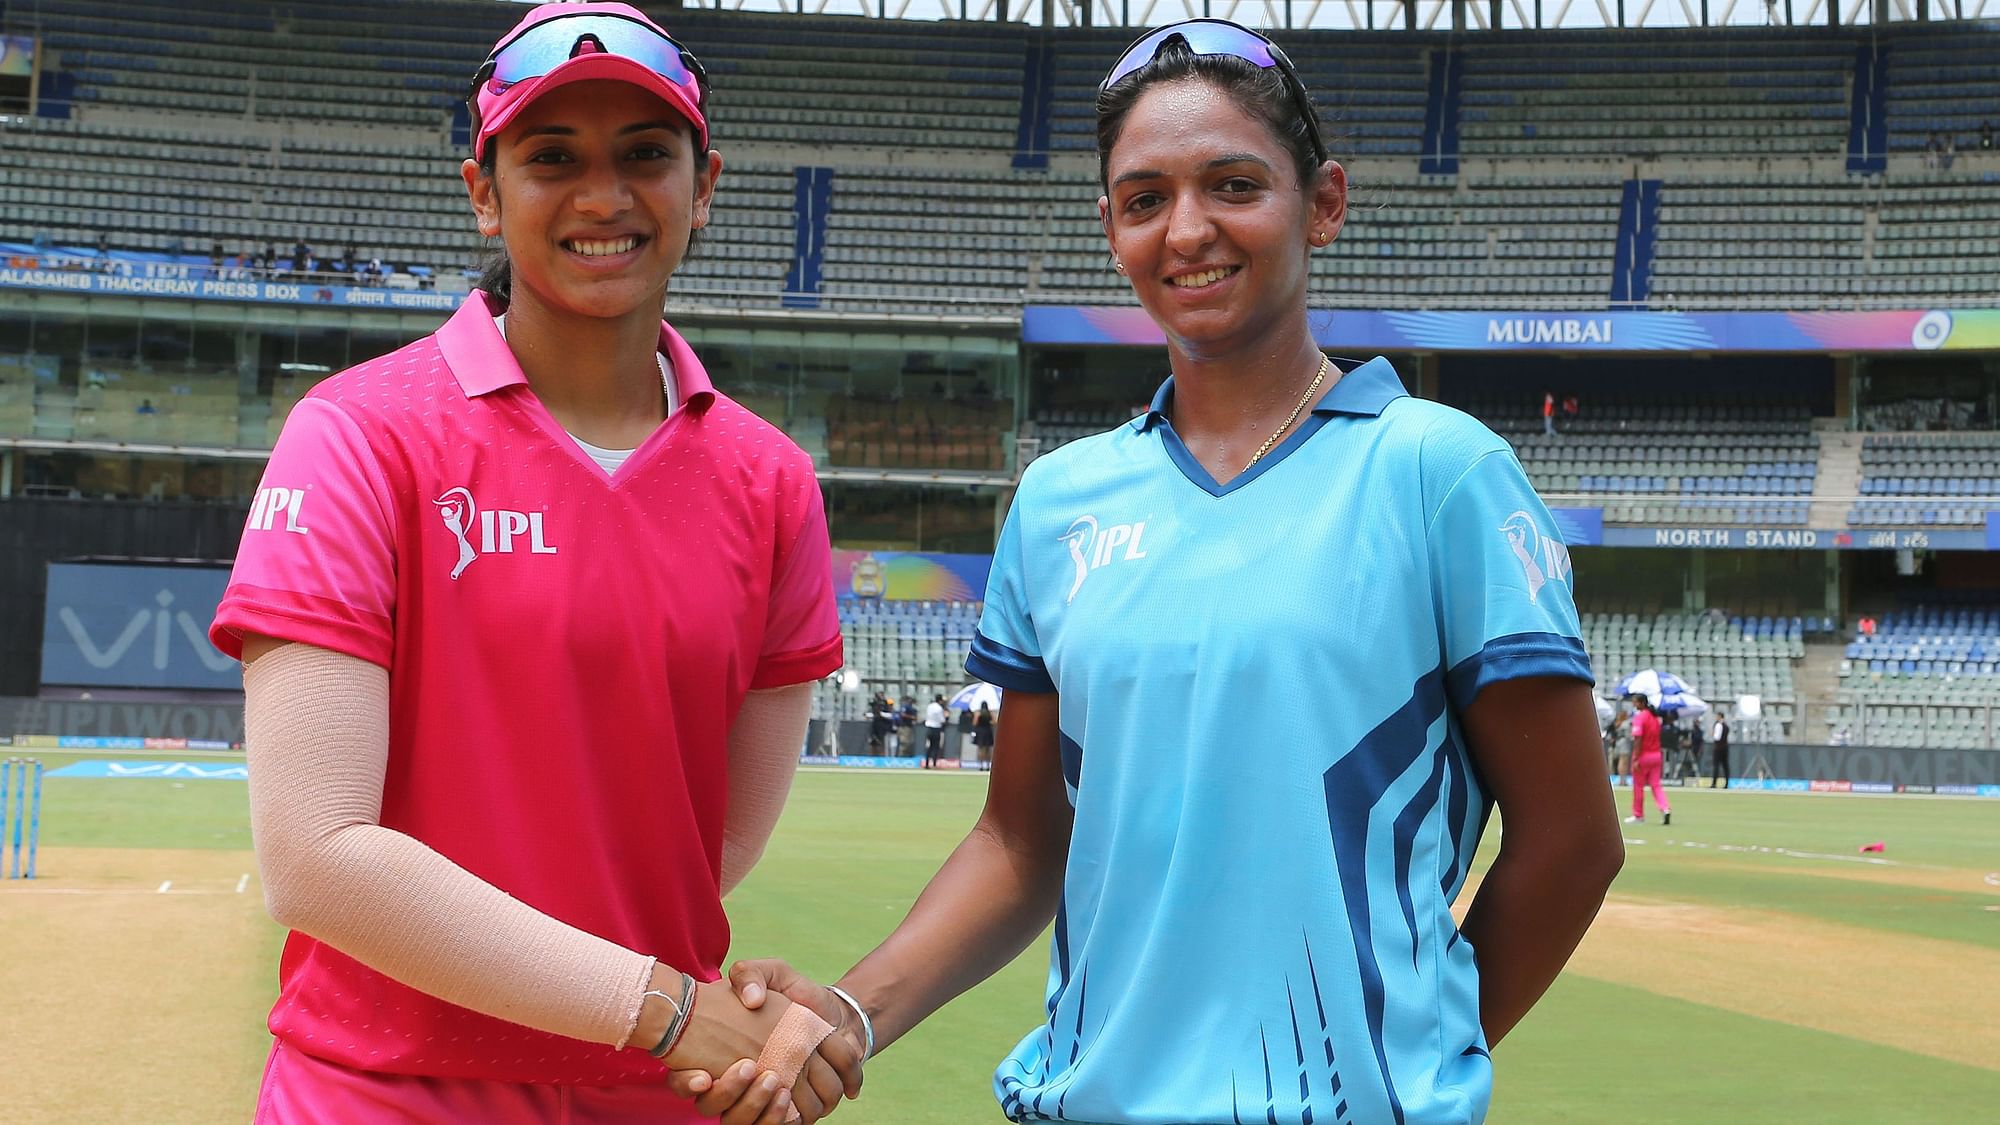 Senior pros Smriti Mandhana and Harmanpreet Kaur will be among the star attractions in The Hundred.&nbsp;